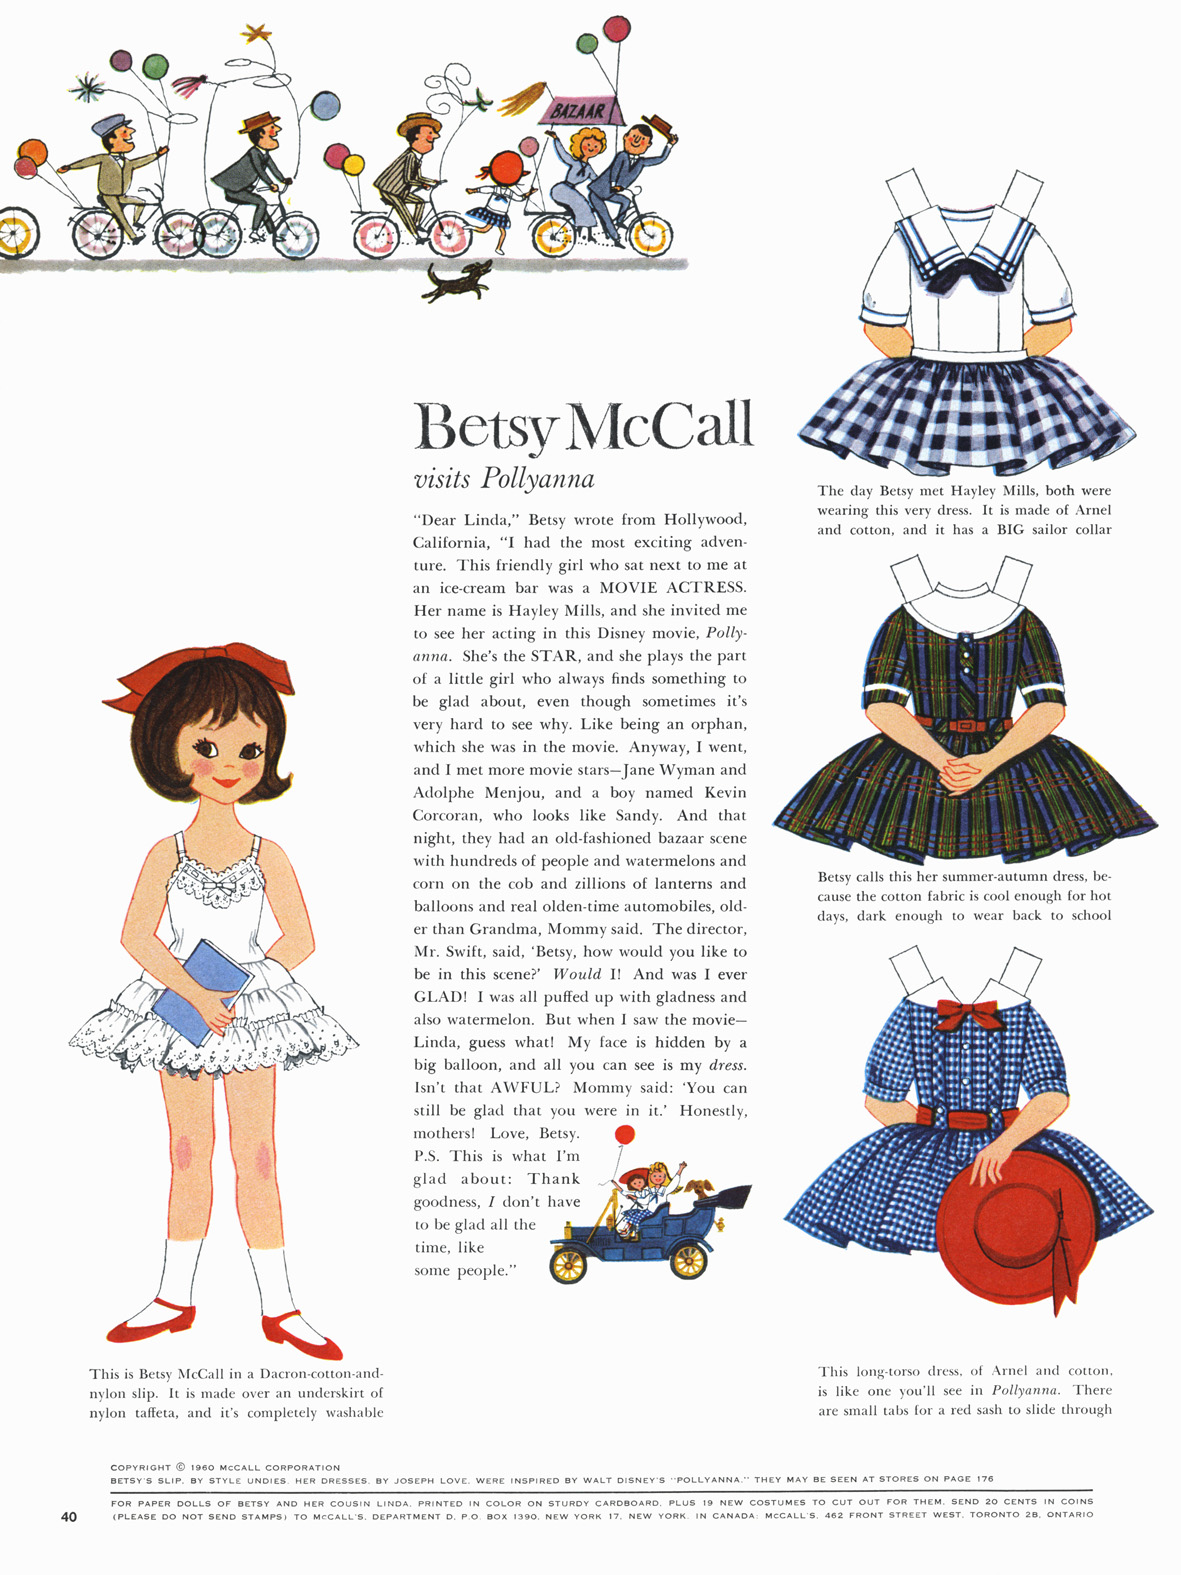 The Paper Collector: Betsy McCall doll, c. 1967